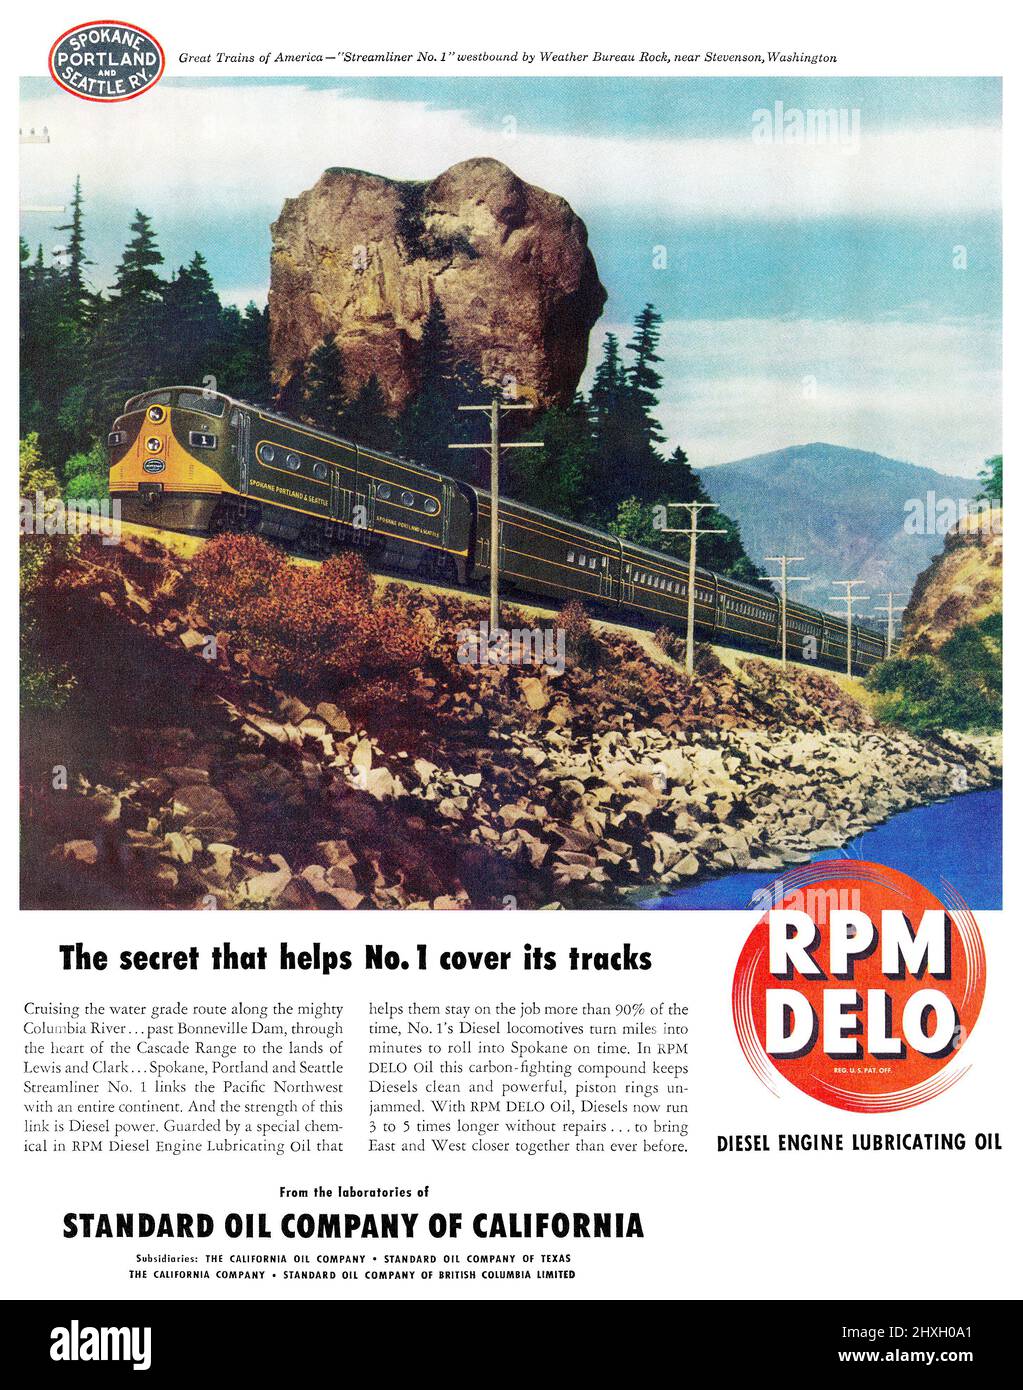 1949 U.S. advertisement for RPM DELO Oil by Standard Oil of California, showing a Diesel locomotive Streamliner No. 1. Stock Photo